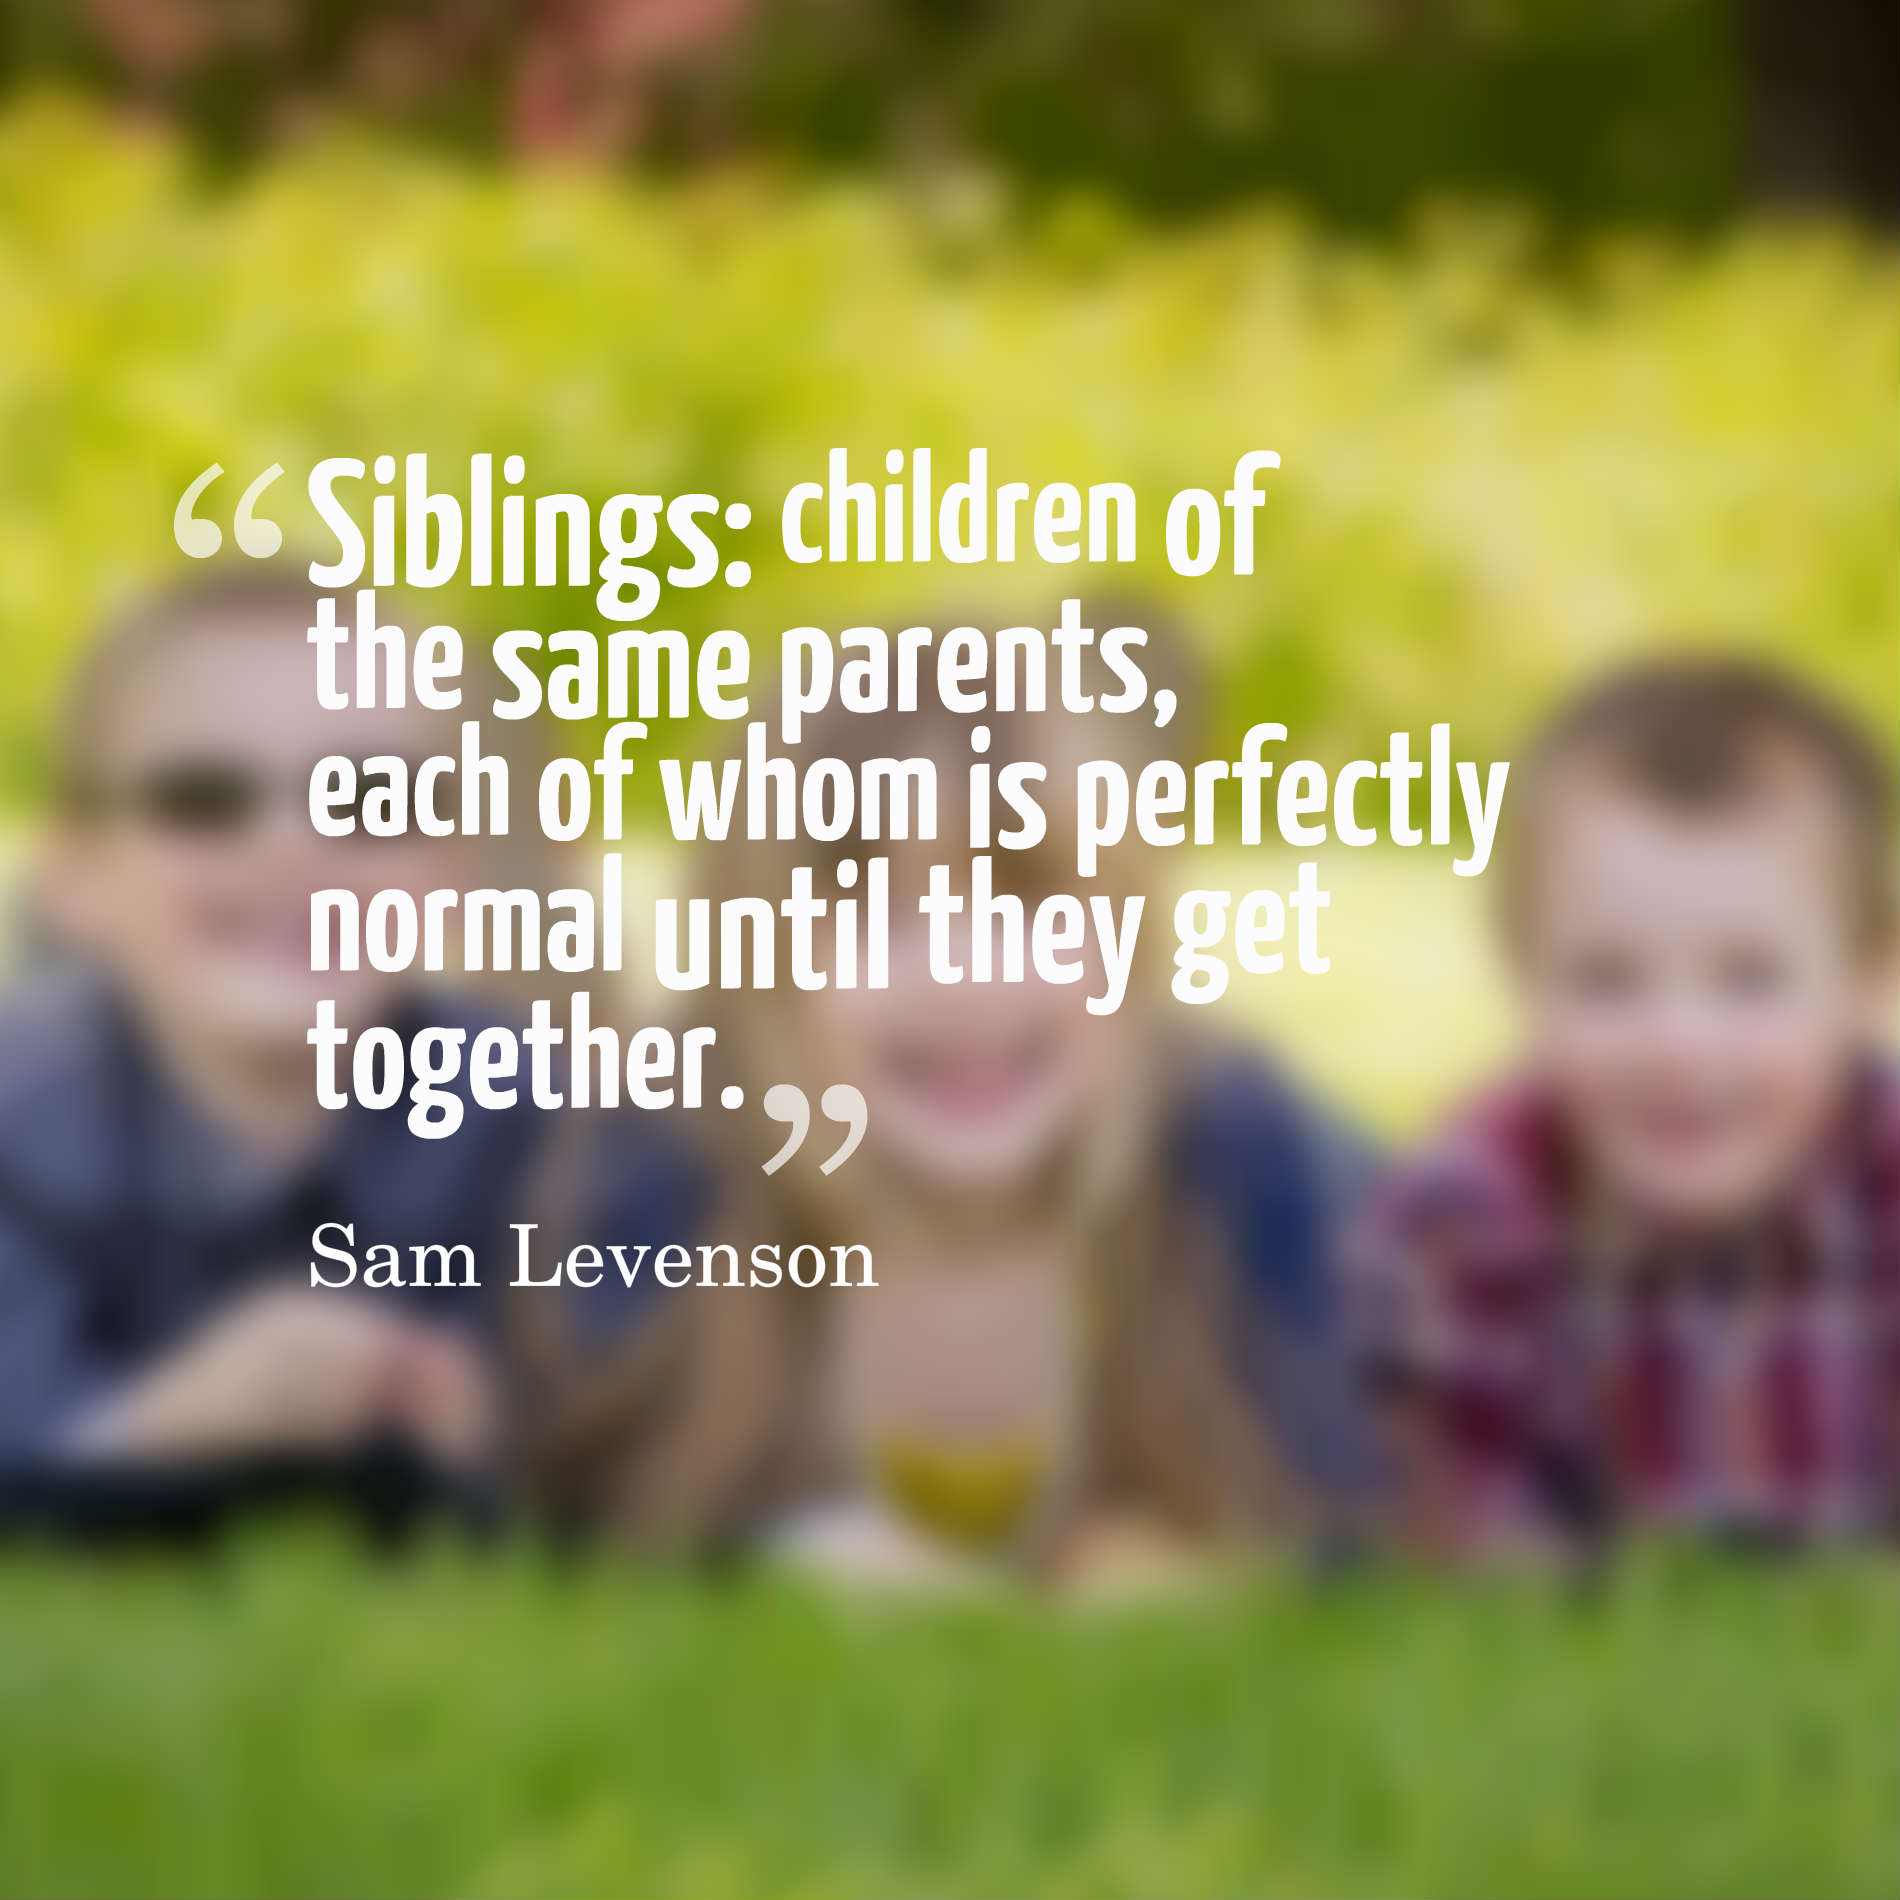 Siblings children of the same parents, each of whom is perfectly normal until they get together.